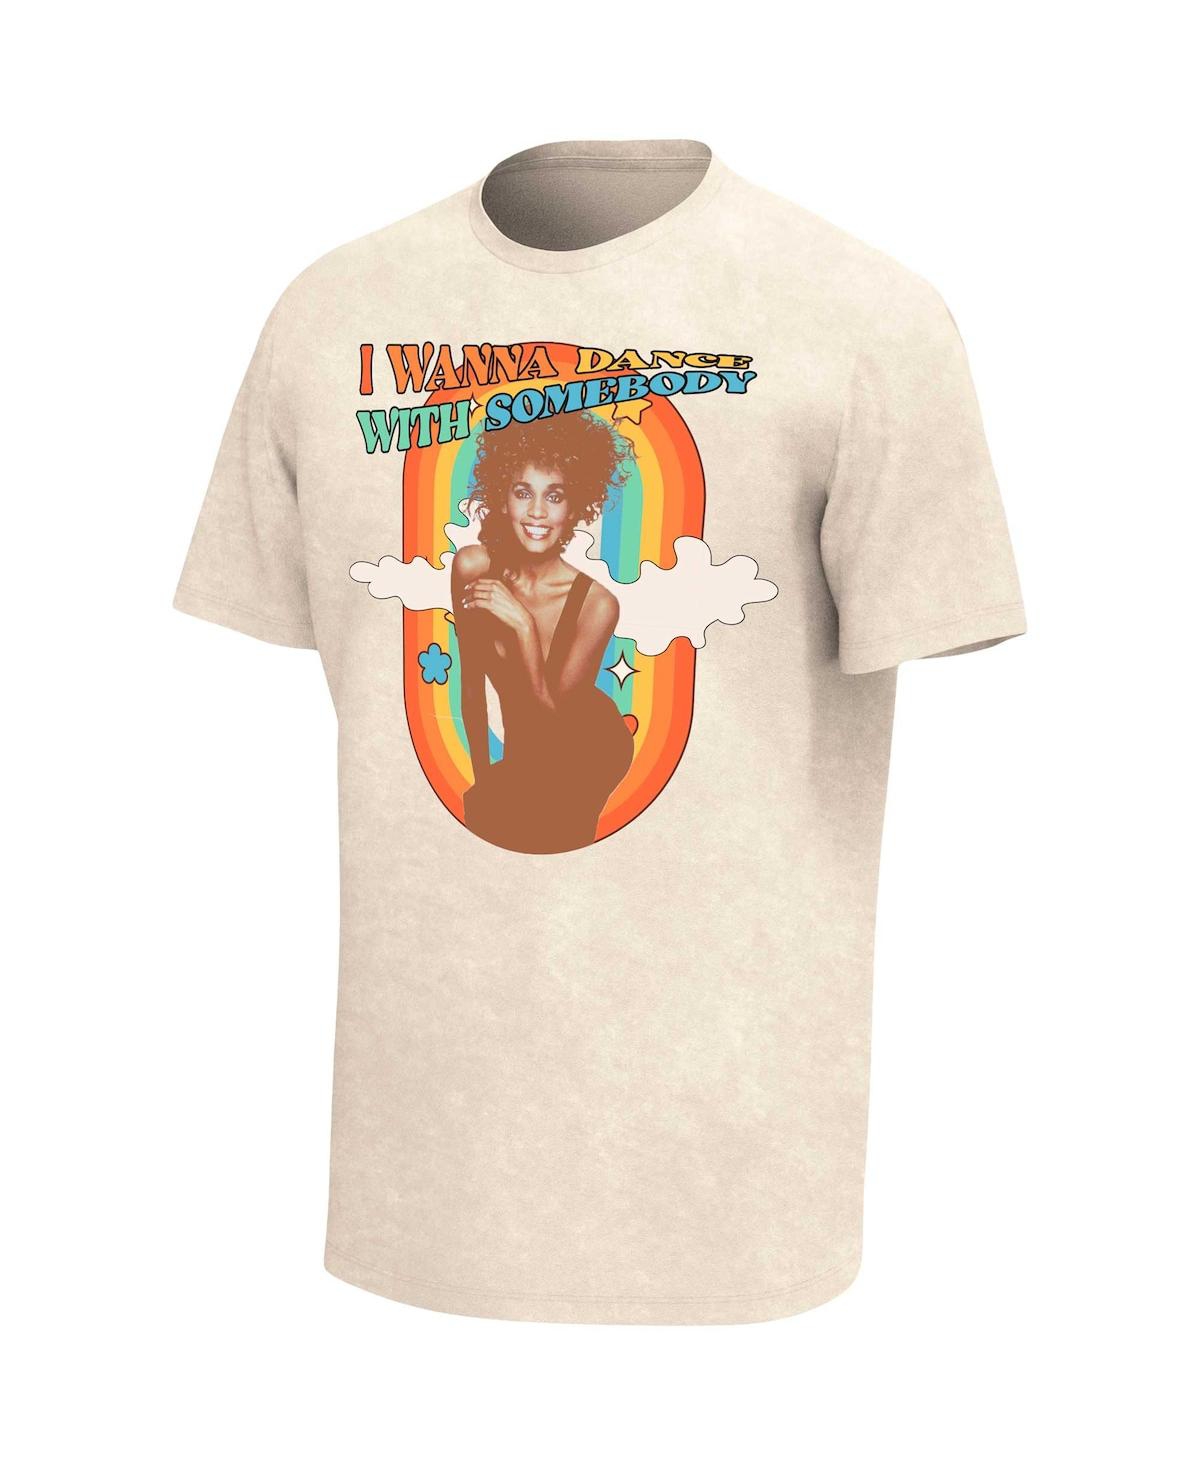 Shop Philcos Men's Oatmeal Whitney Houston Dance With Somebody Washed T-shirt